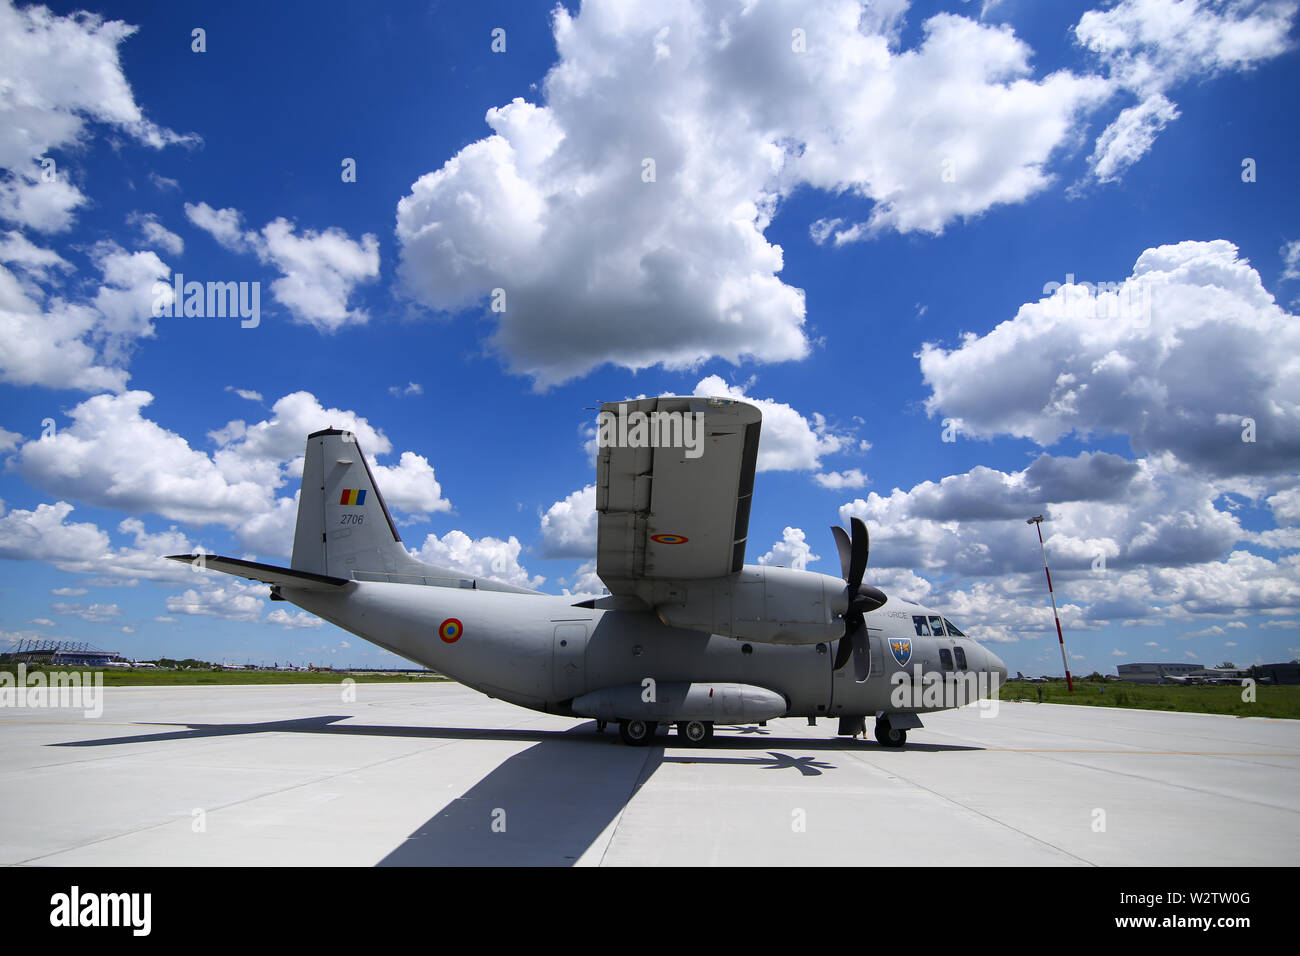 Otopeni, Romania - May 22, 2019: Alenia C-27J Spartan military cargo plane from the Romanian Air Force landed in an airbase during a drill. Stock Photo